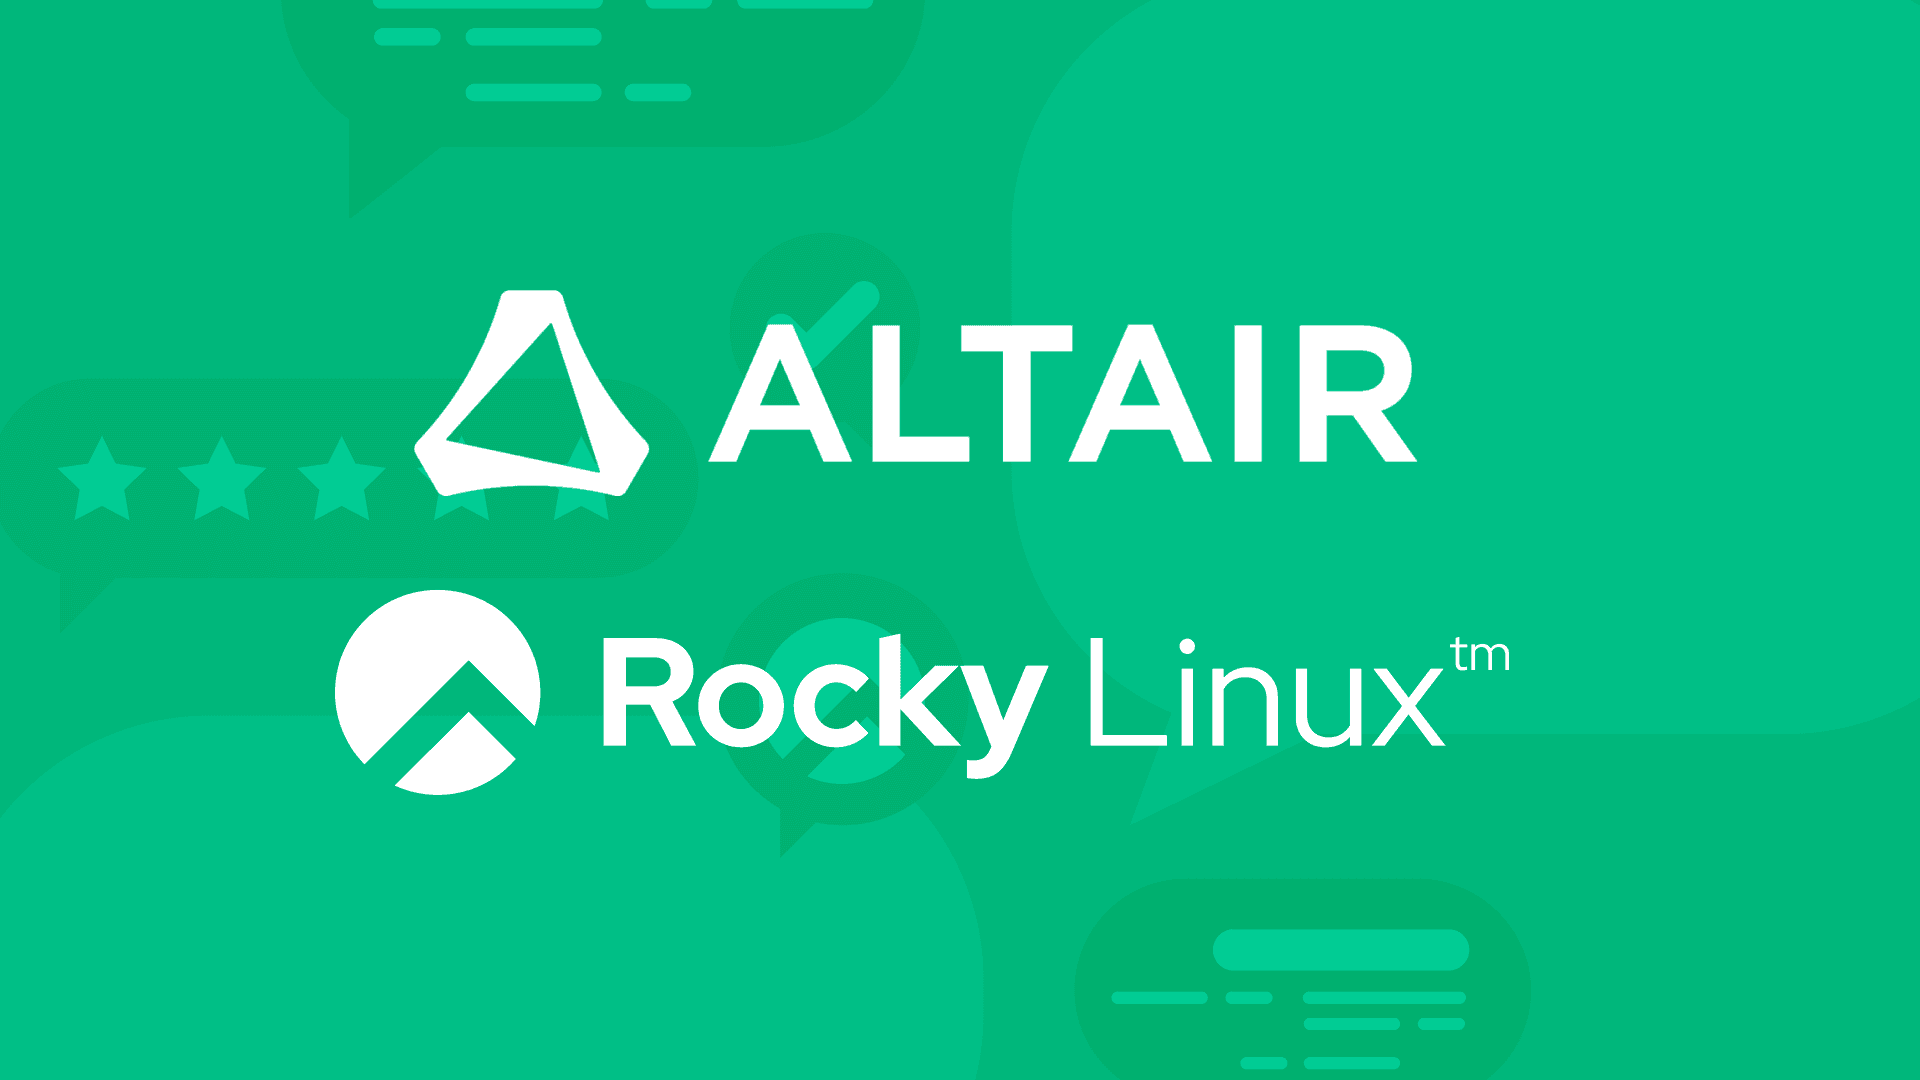 Altair Adds Support for Rocky Linux in Altair HyperWorks